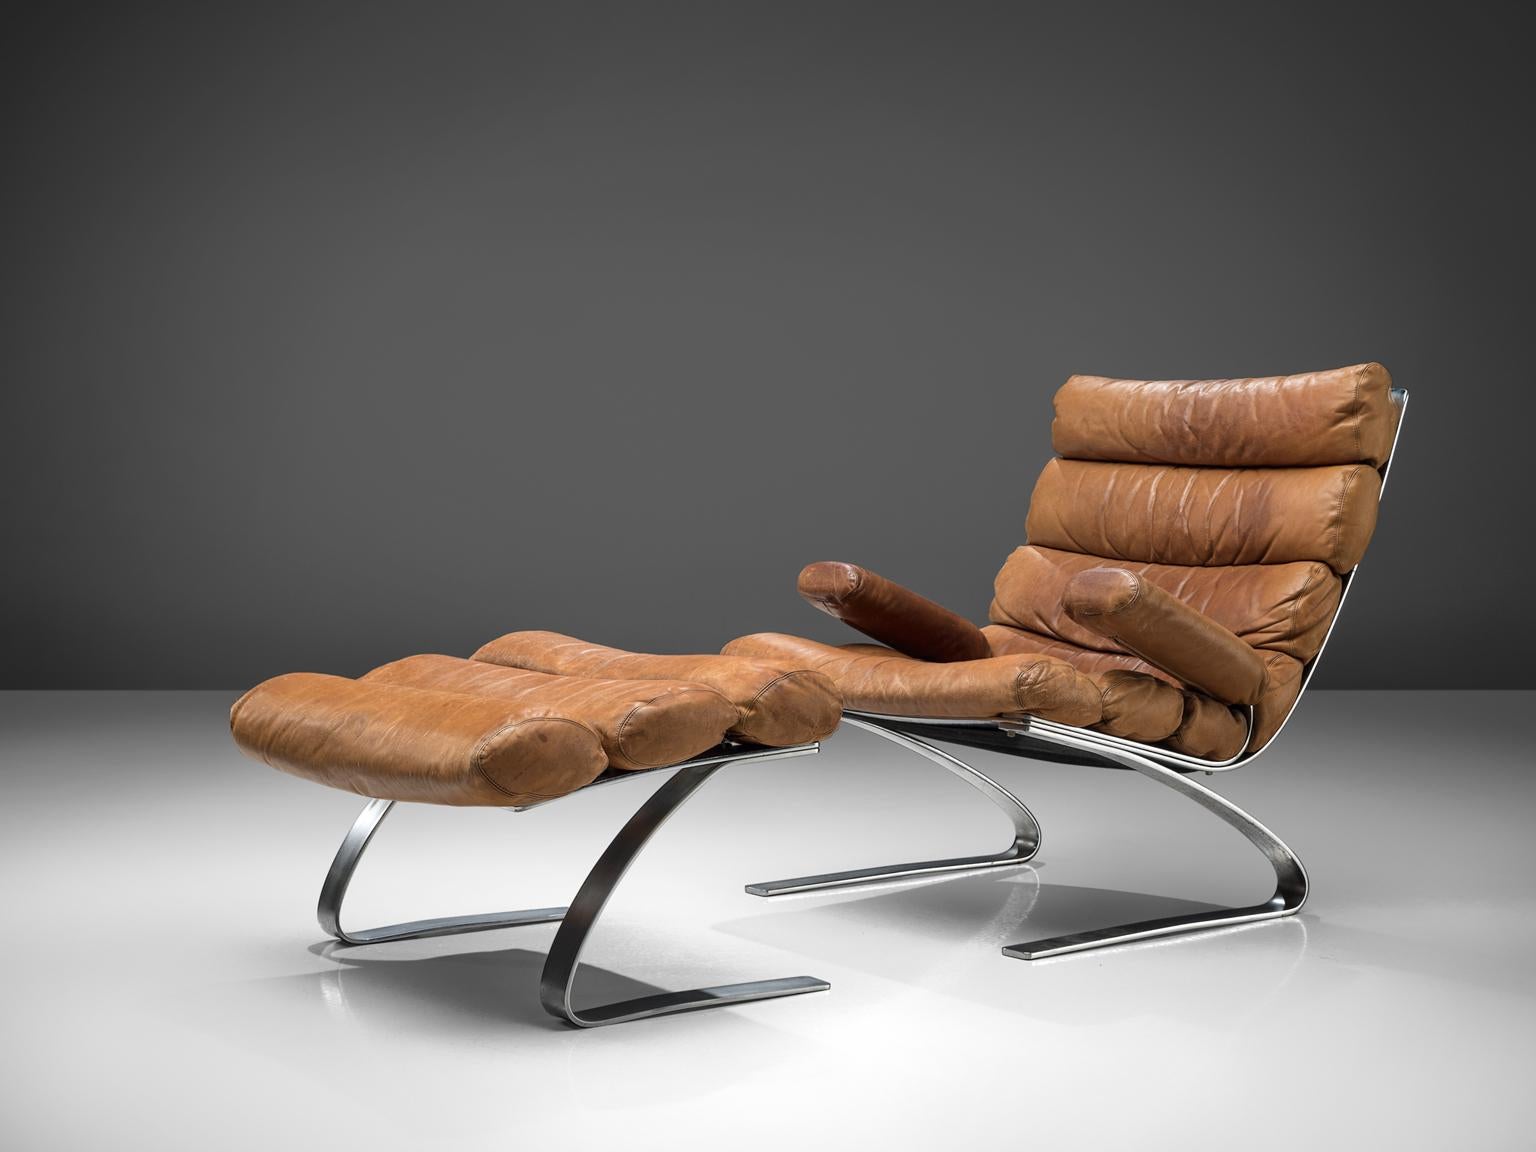 Reinhold Adolf and Hans-Jürgen Schräpfer for COR, lounge chair and pouf, cognac leather, steel, Germany, 1976.

This comfortable chair is designed by Reinhold Adolf and Hans-Jürgen Schräpfer for COR. The chair is designed as part of the Sinus